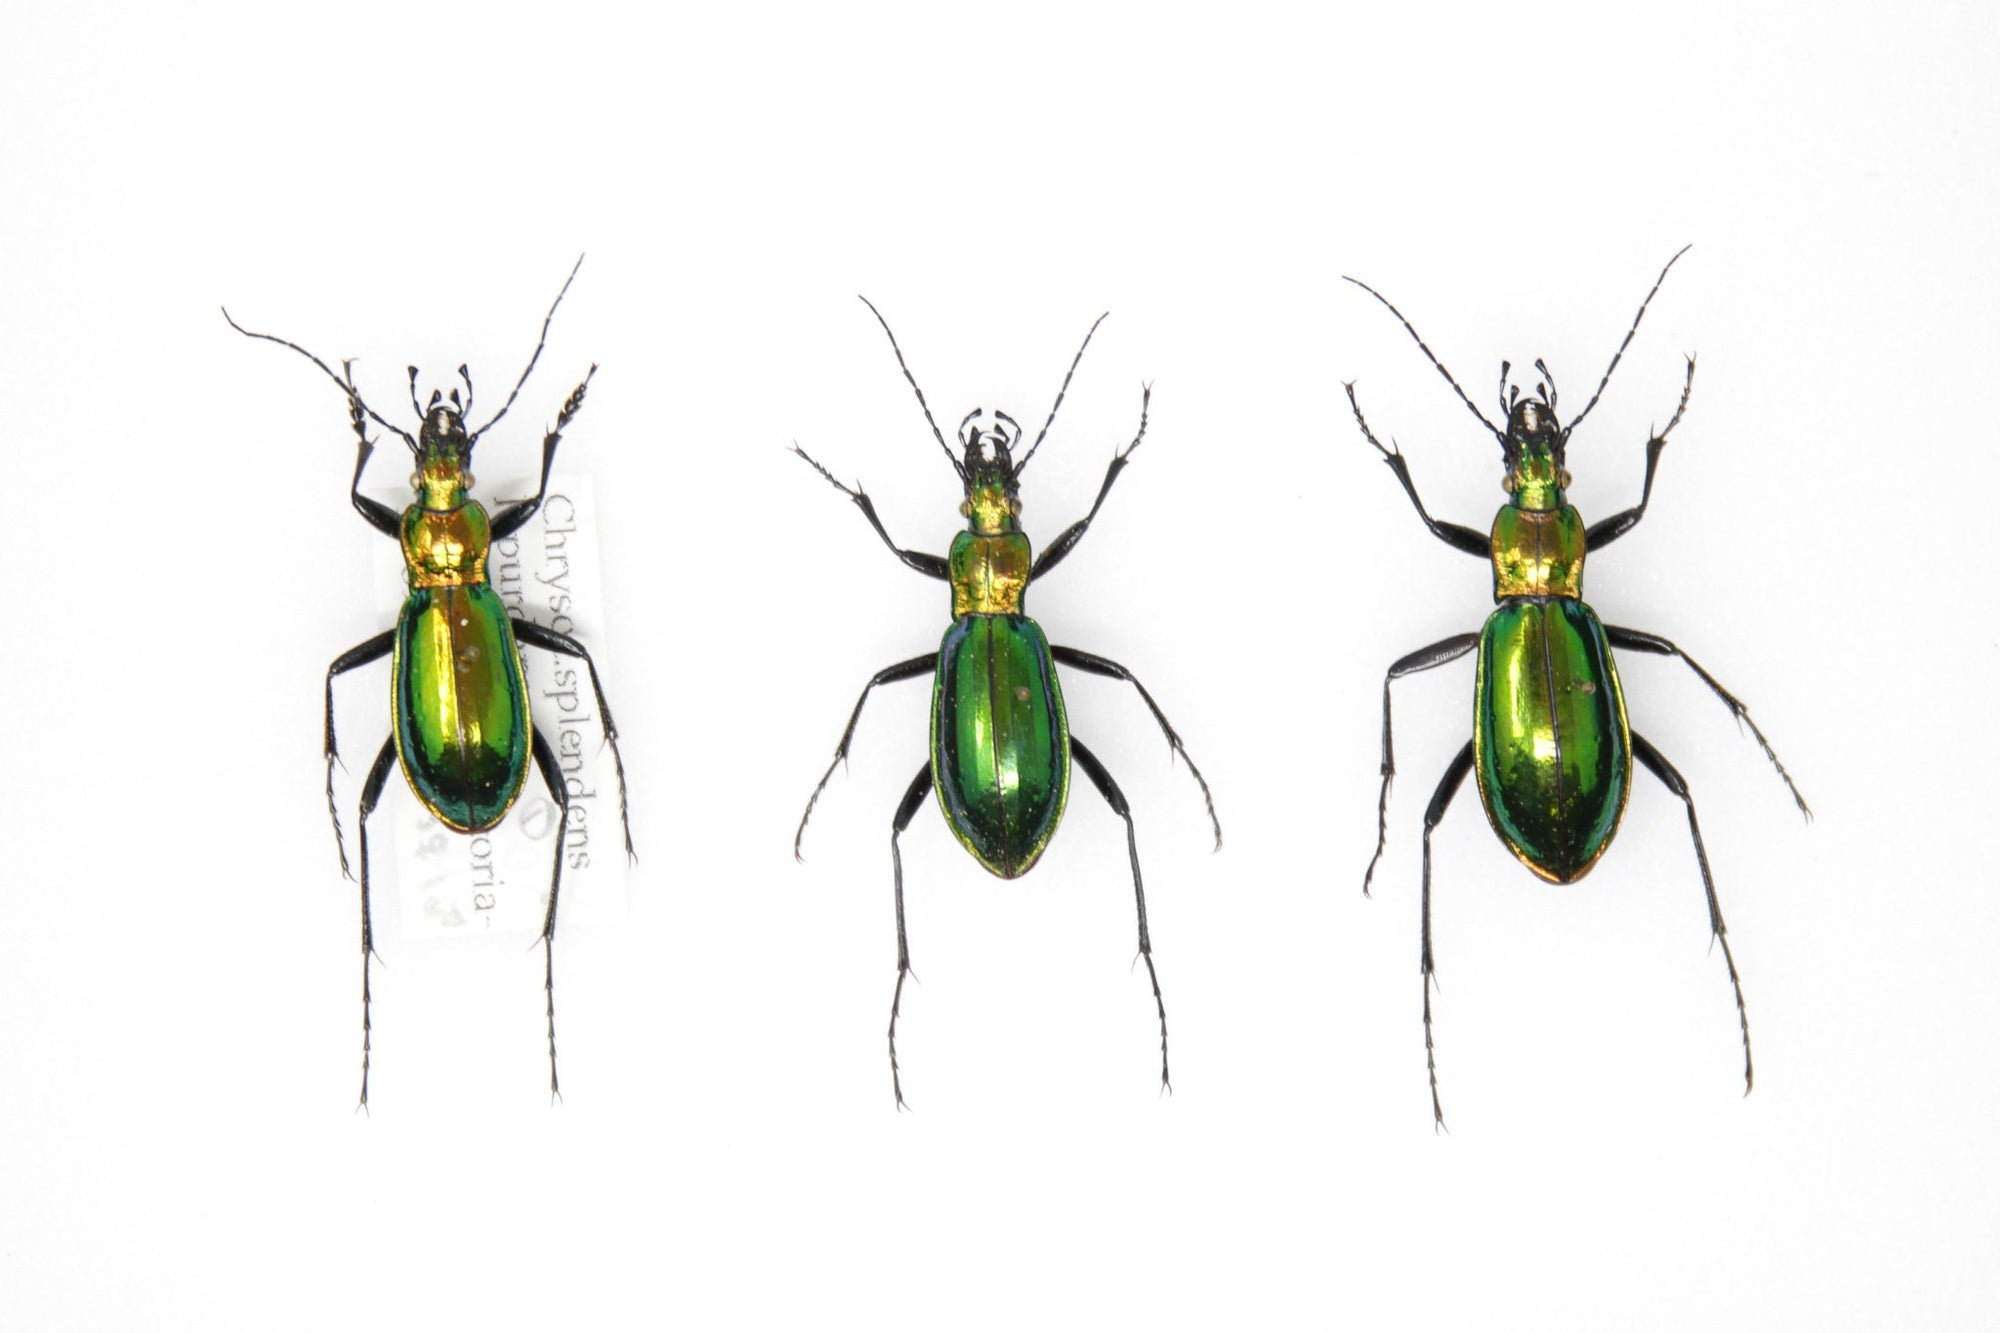 Set of Chrysocarabus splendens | Pinned Insect Specimens with Collection Data | Carabidae GREEN Beetles in a Gift Box (JN21-58)